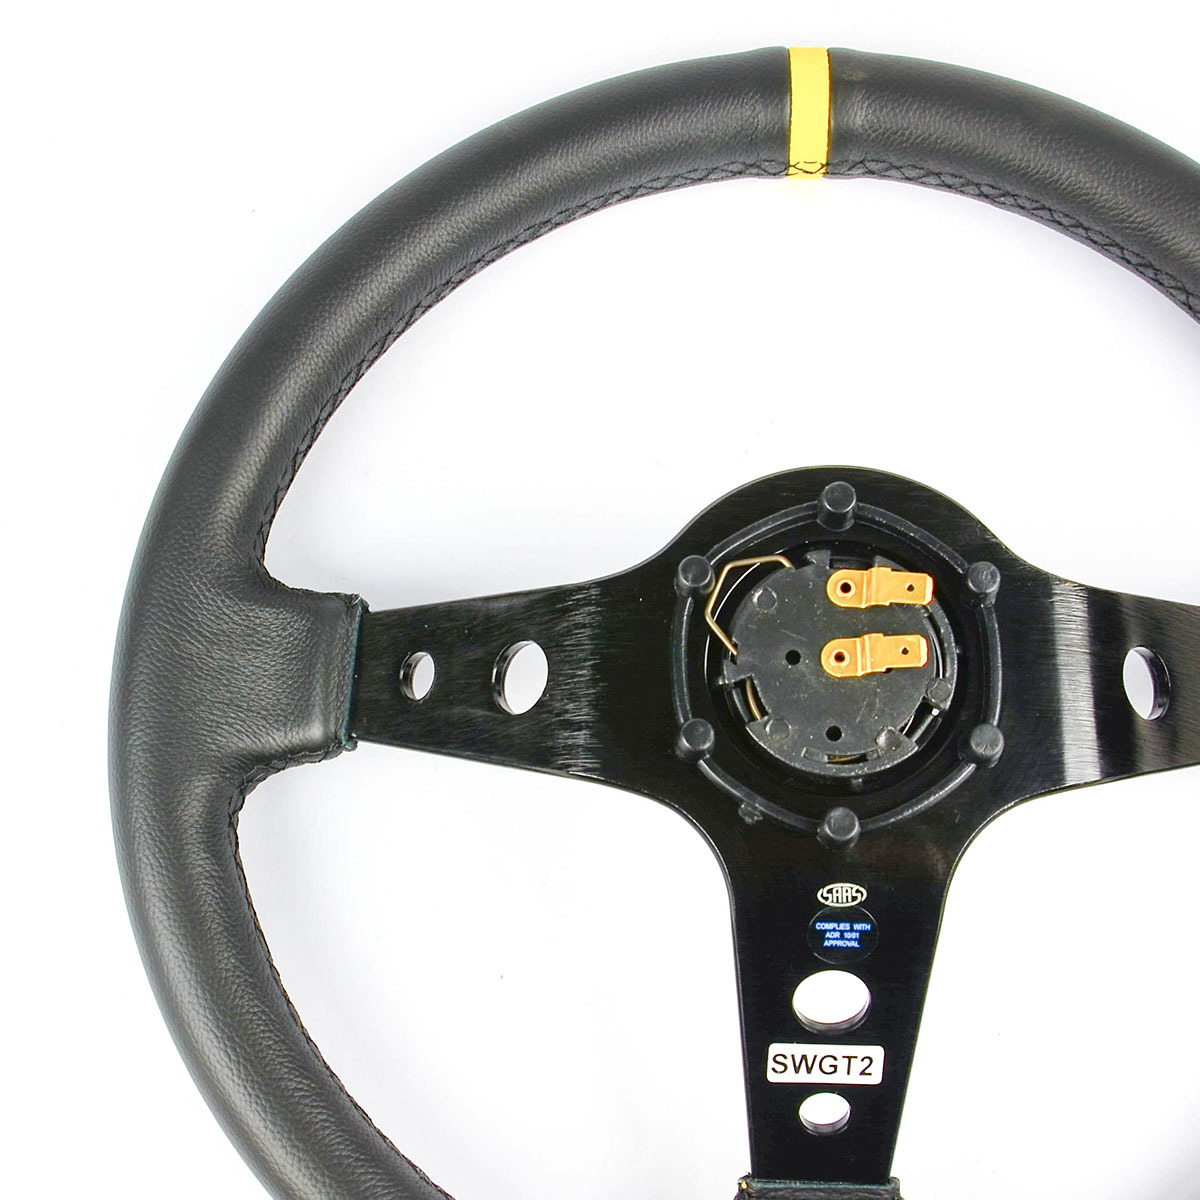 Steering Wheel Leather 14" ADR GT Deep Dish Black With Holes + Indicator